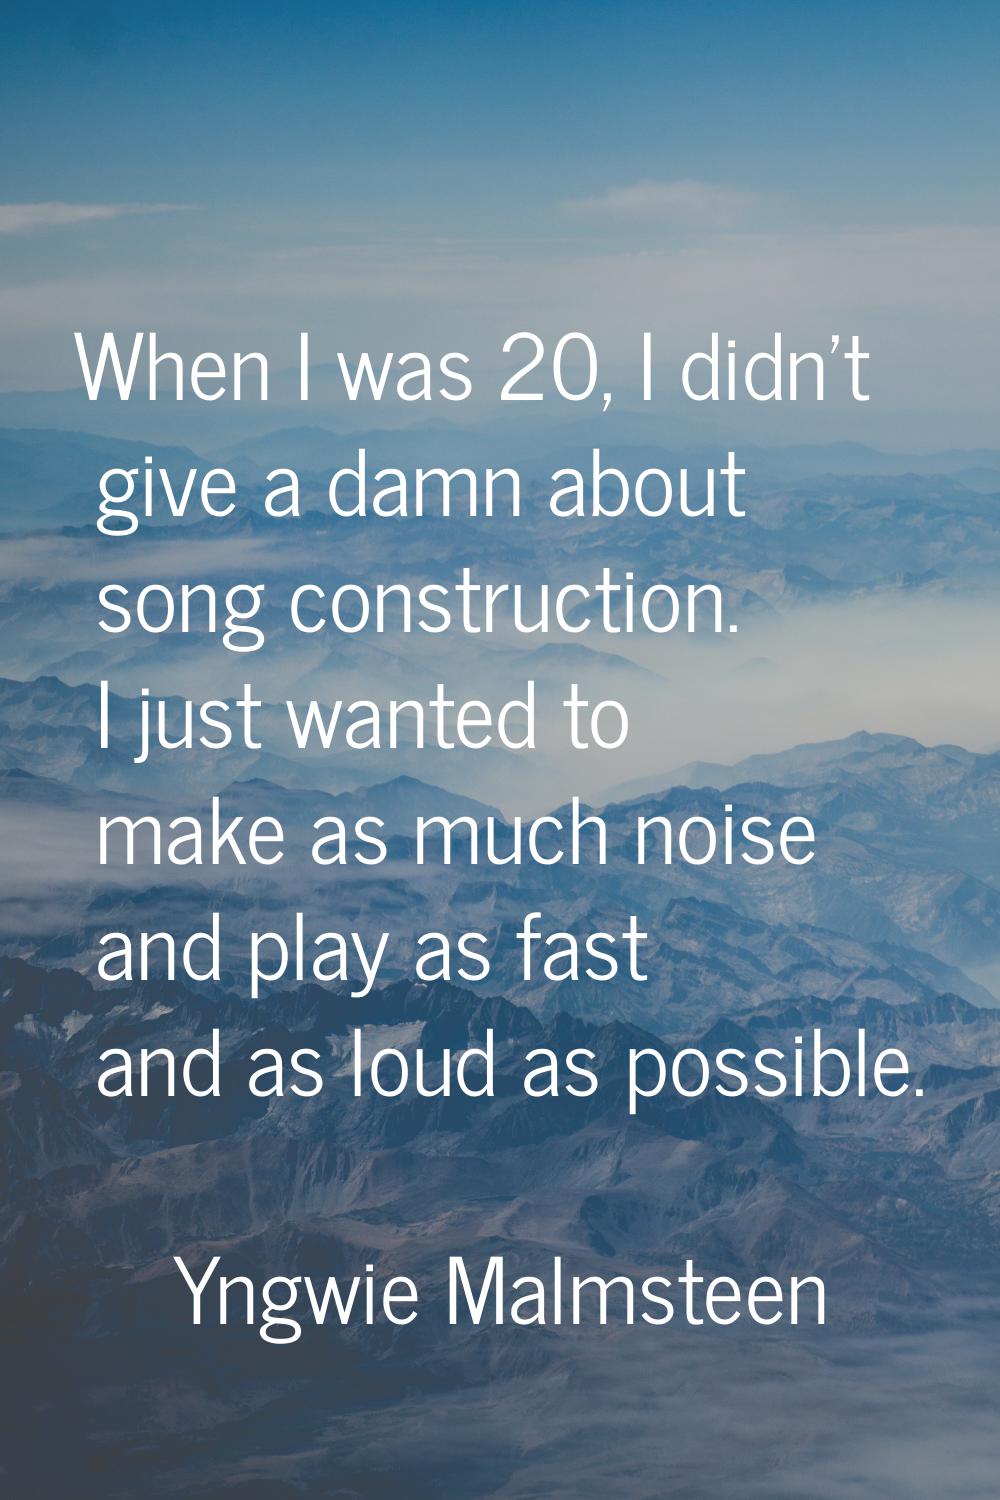 When I was 20, I didn't give a damn about song construction. I just wanted to make as much noise an